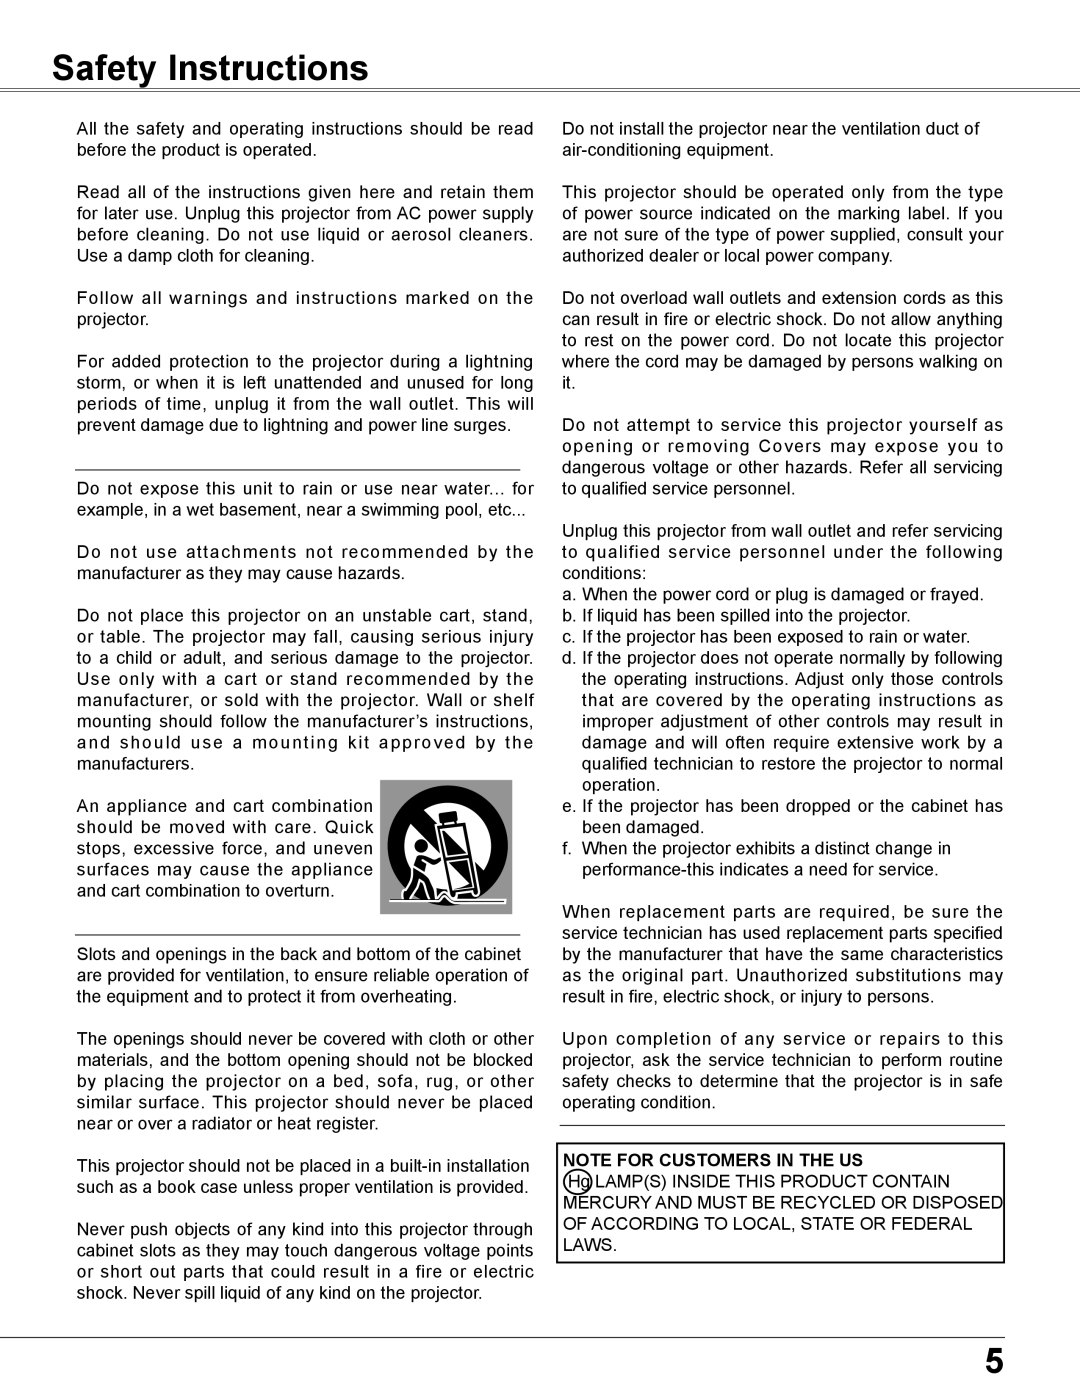 Sanyo WXU700A owner manual Safety Instructions, Note For Customers In The Us 